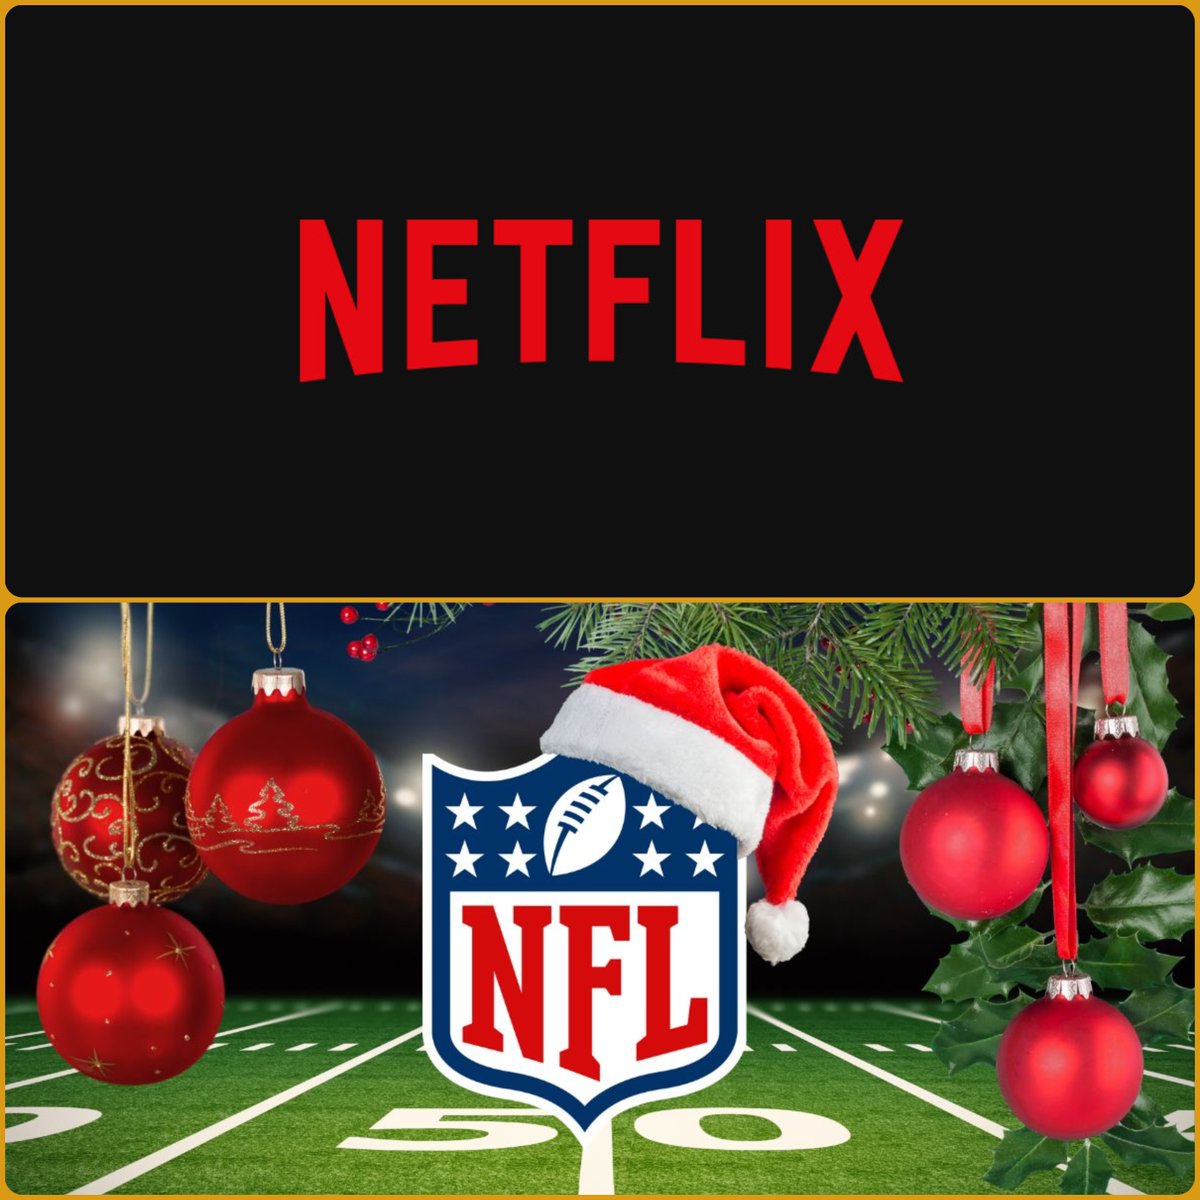 Netflix is finalizing a deal to acquire exclusive rights to stream both NFL games on Christmas Day this upcoming season, per Bloomberg. 

Netflix is expected to purchase the package for less than $150 million per game.